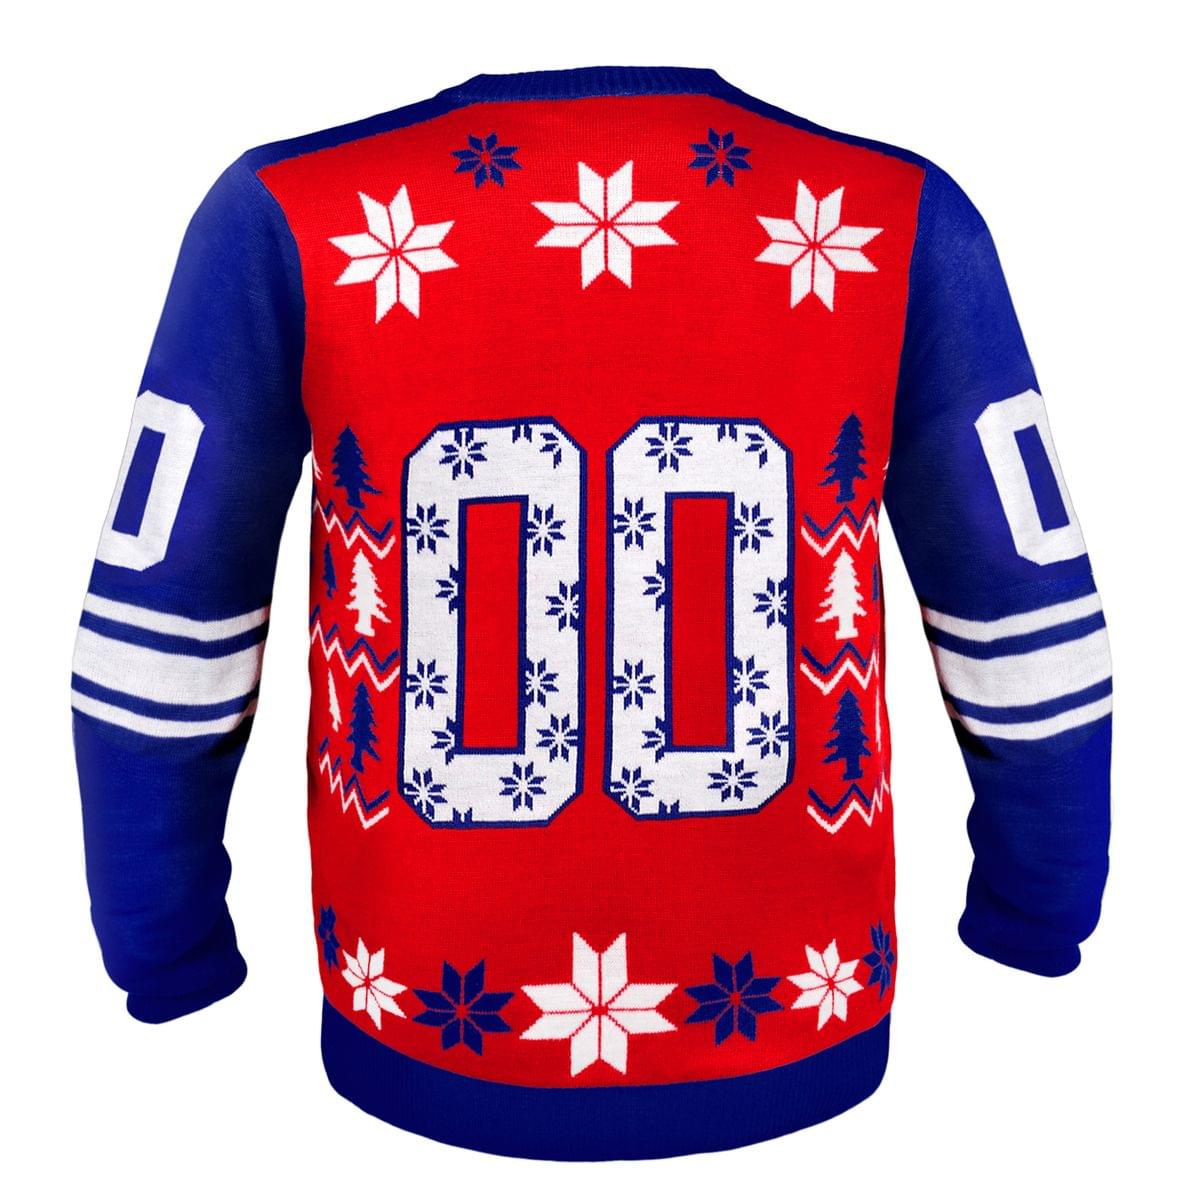 New York Giants Team Jersey NFL Ugly Sweater